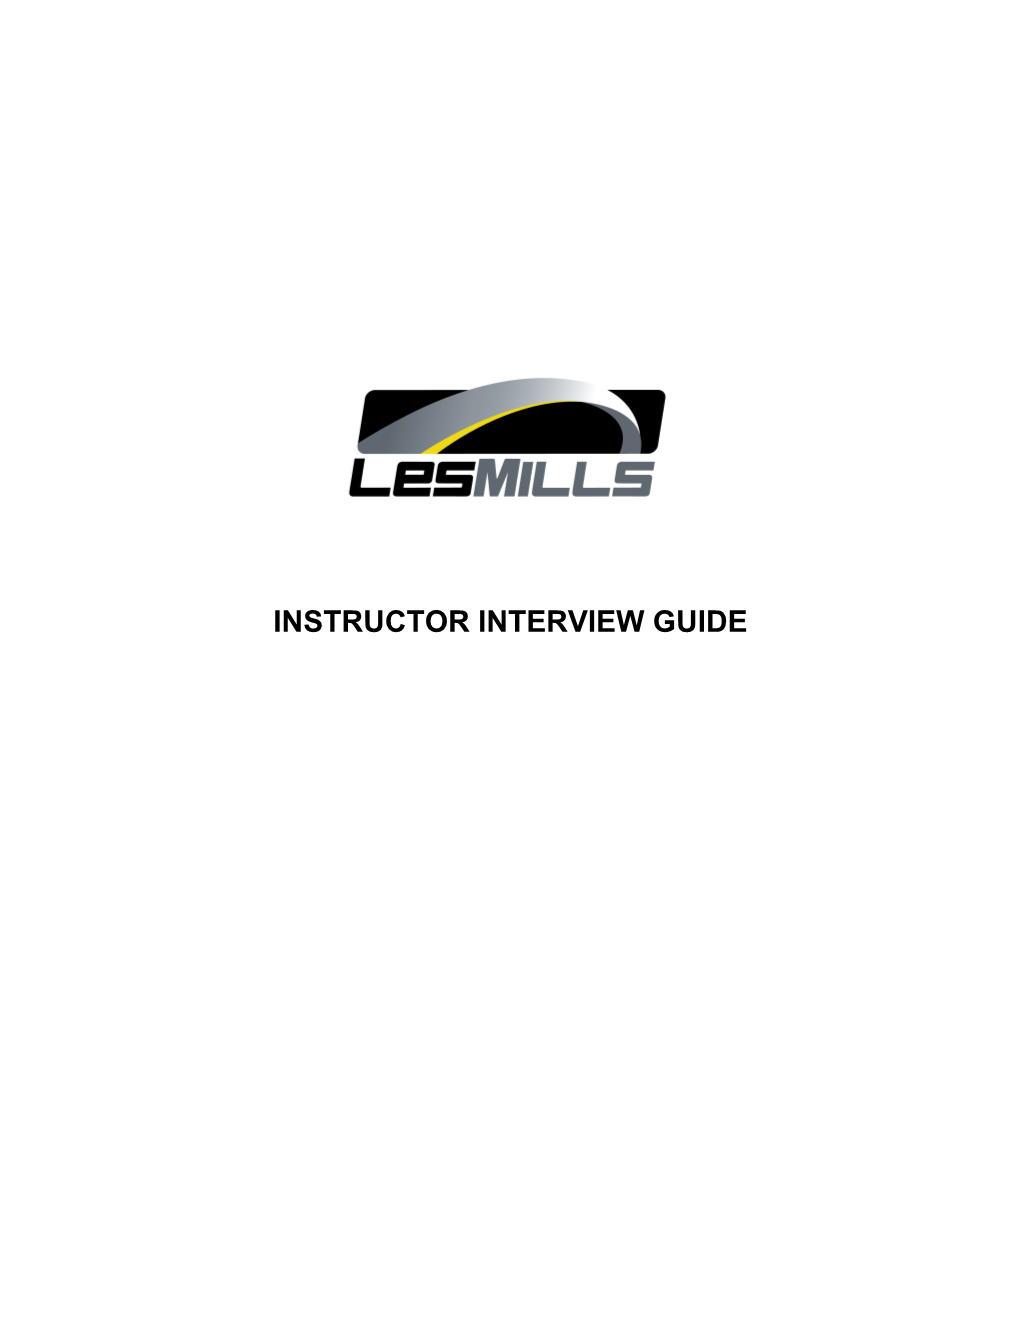 Les Mills Instructor Interview Guide